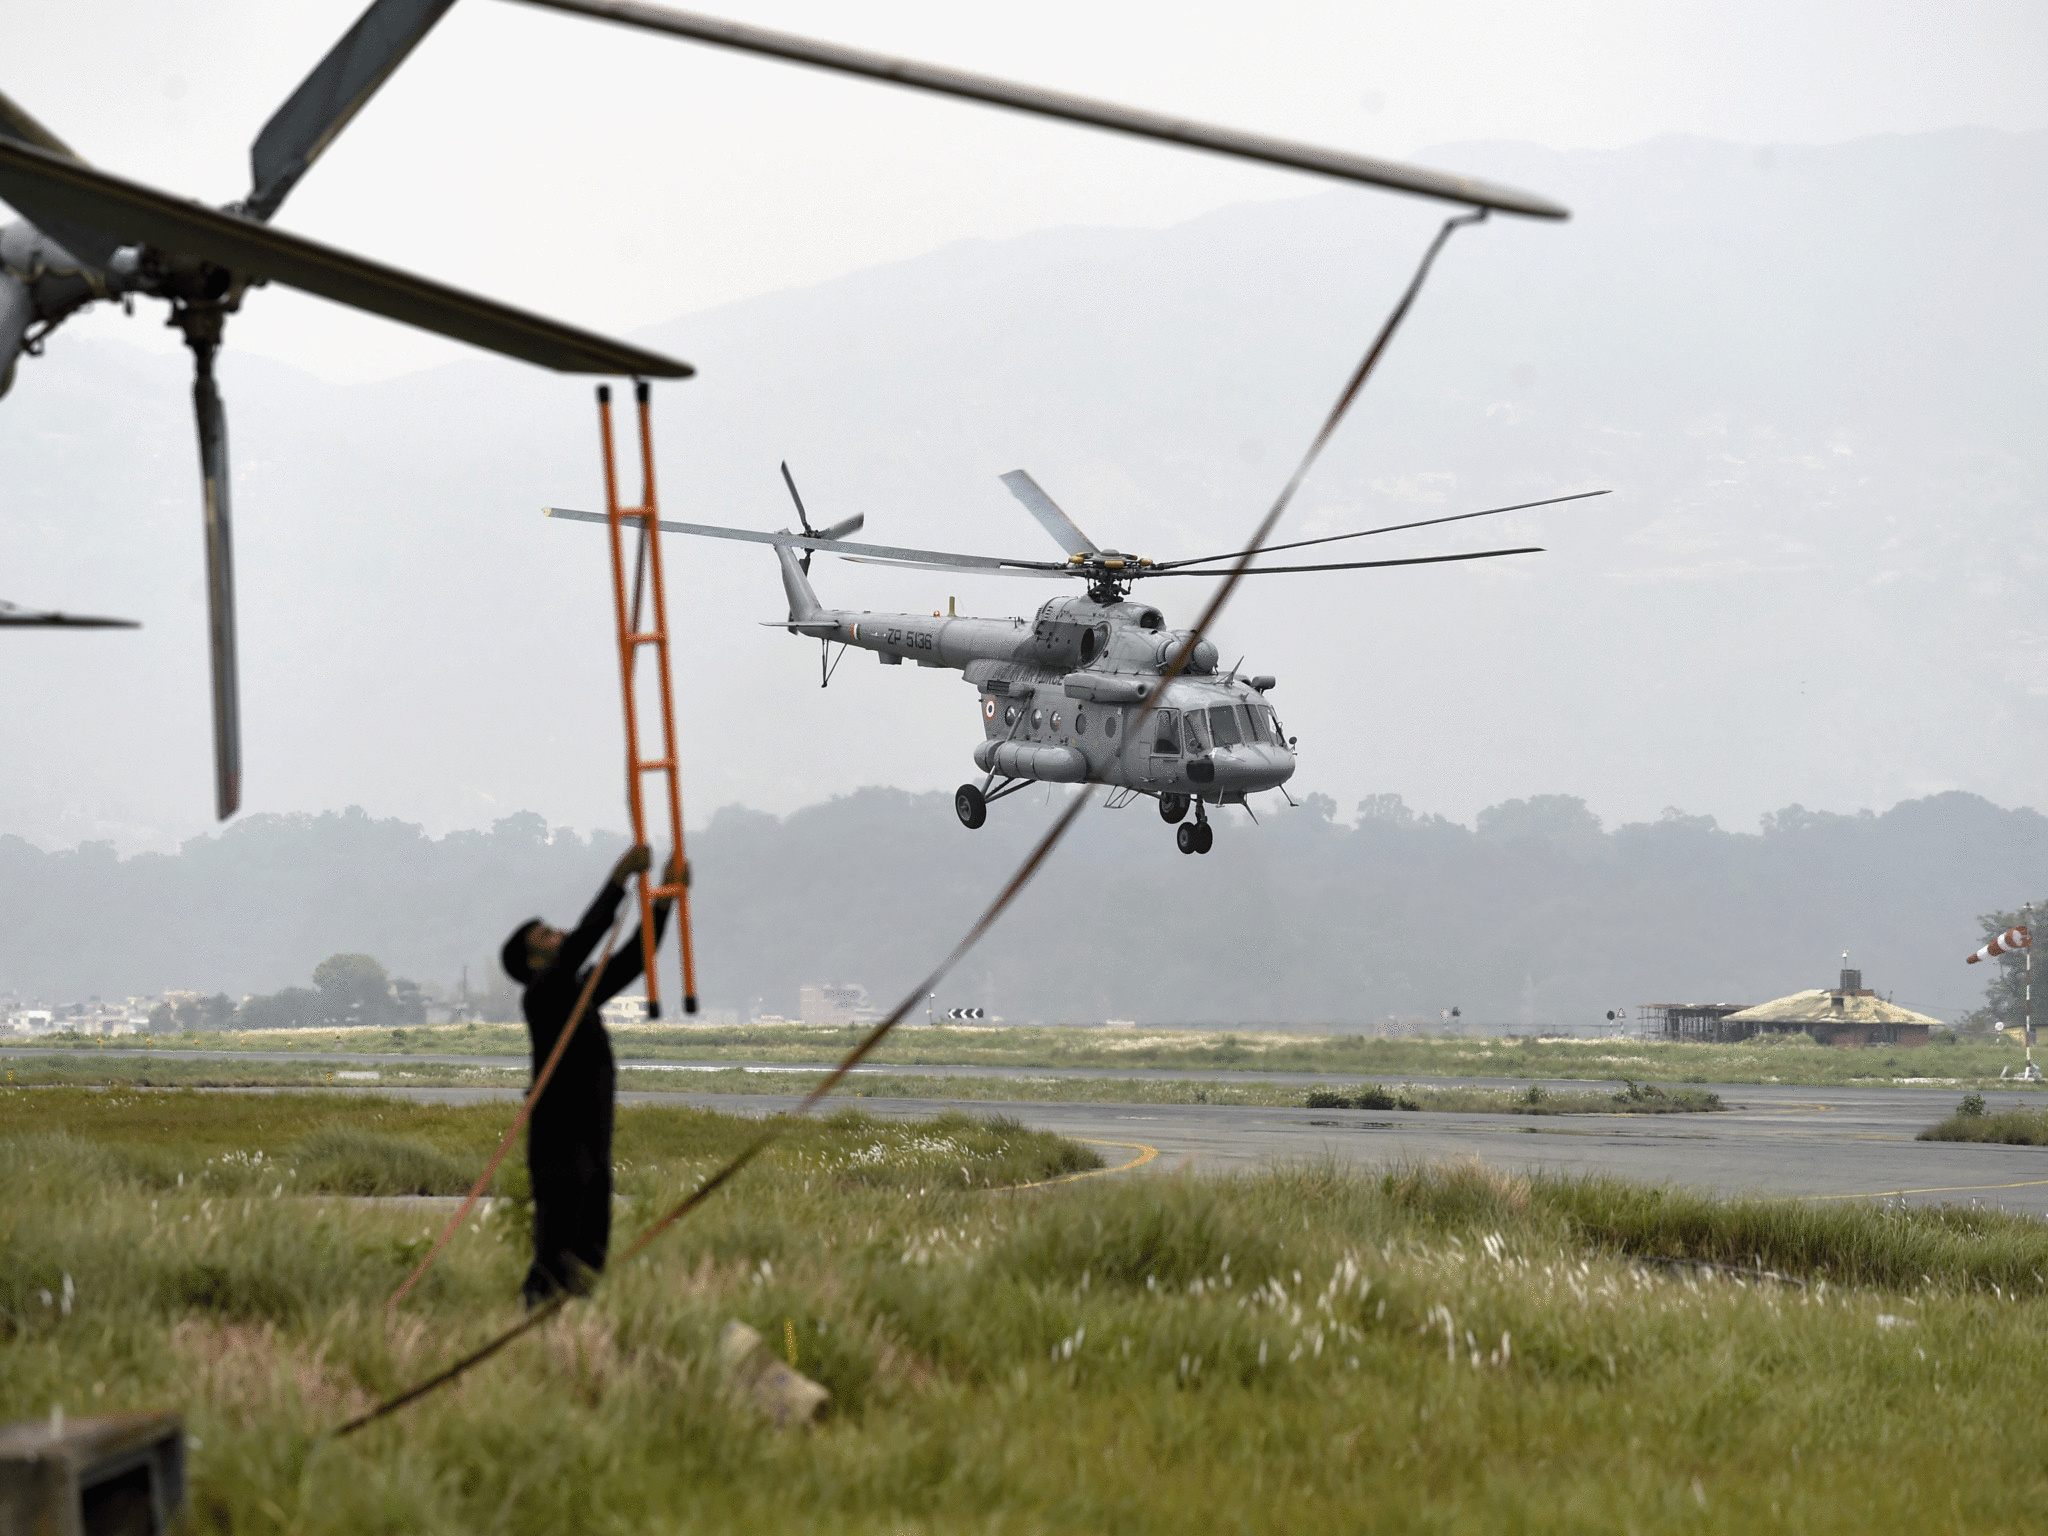 An Indian airforce crew member uses a ladder as he tries to tie down the rotor blade of a transport helicopter as another Indian aircraft lands at Kathmandu's International airport on May 7, 2015.